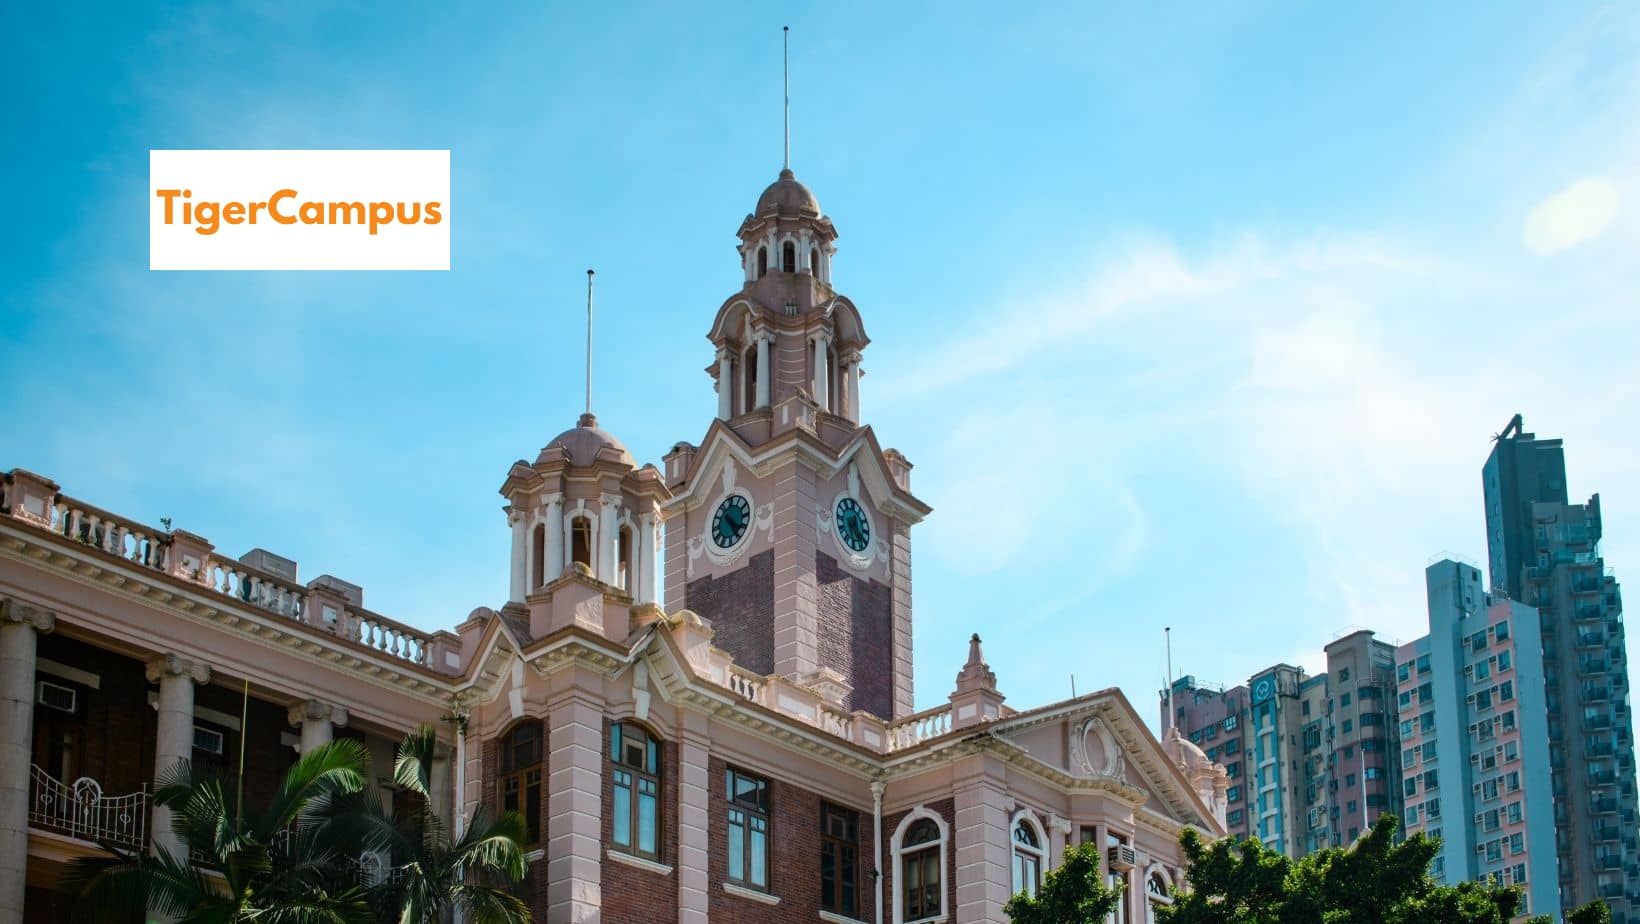 What's it like to study at Hong Kong University of Science and Technology?